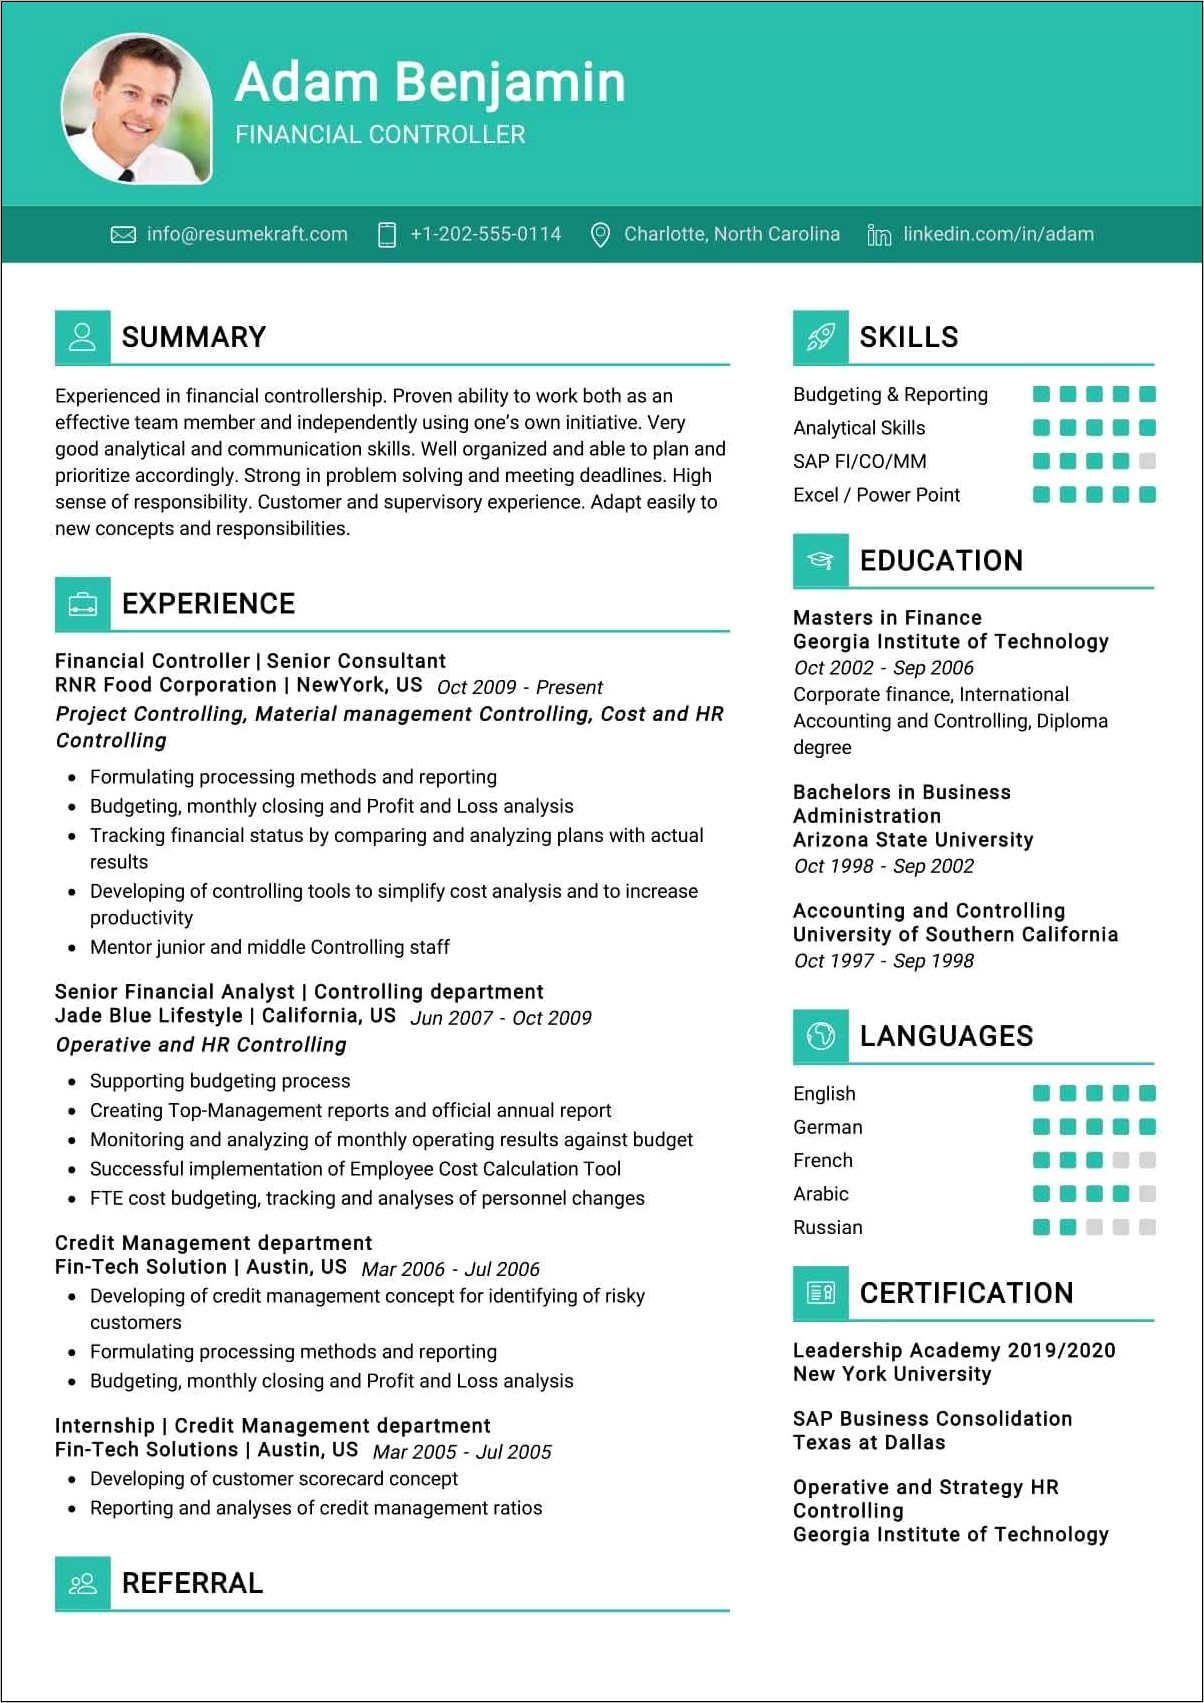 Corporate Credit Manager Resume Summary